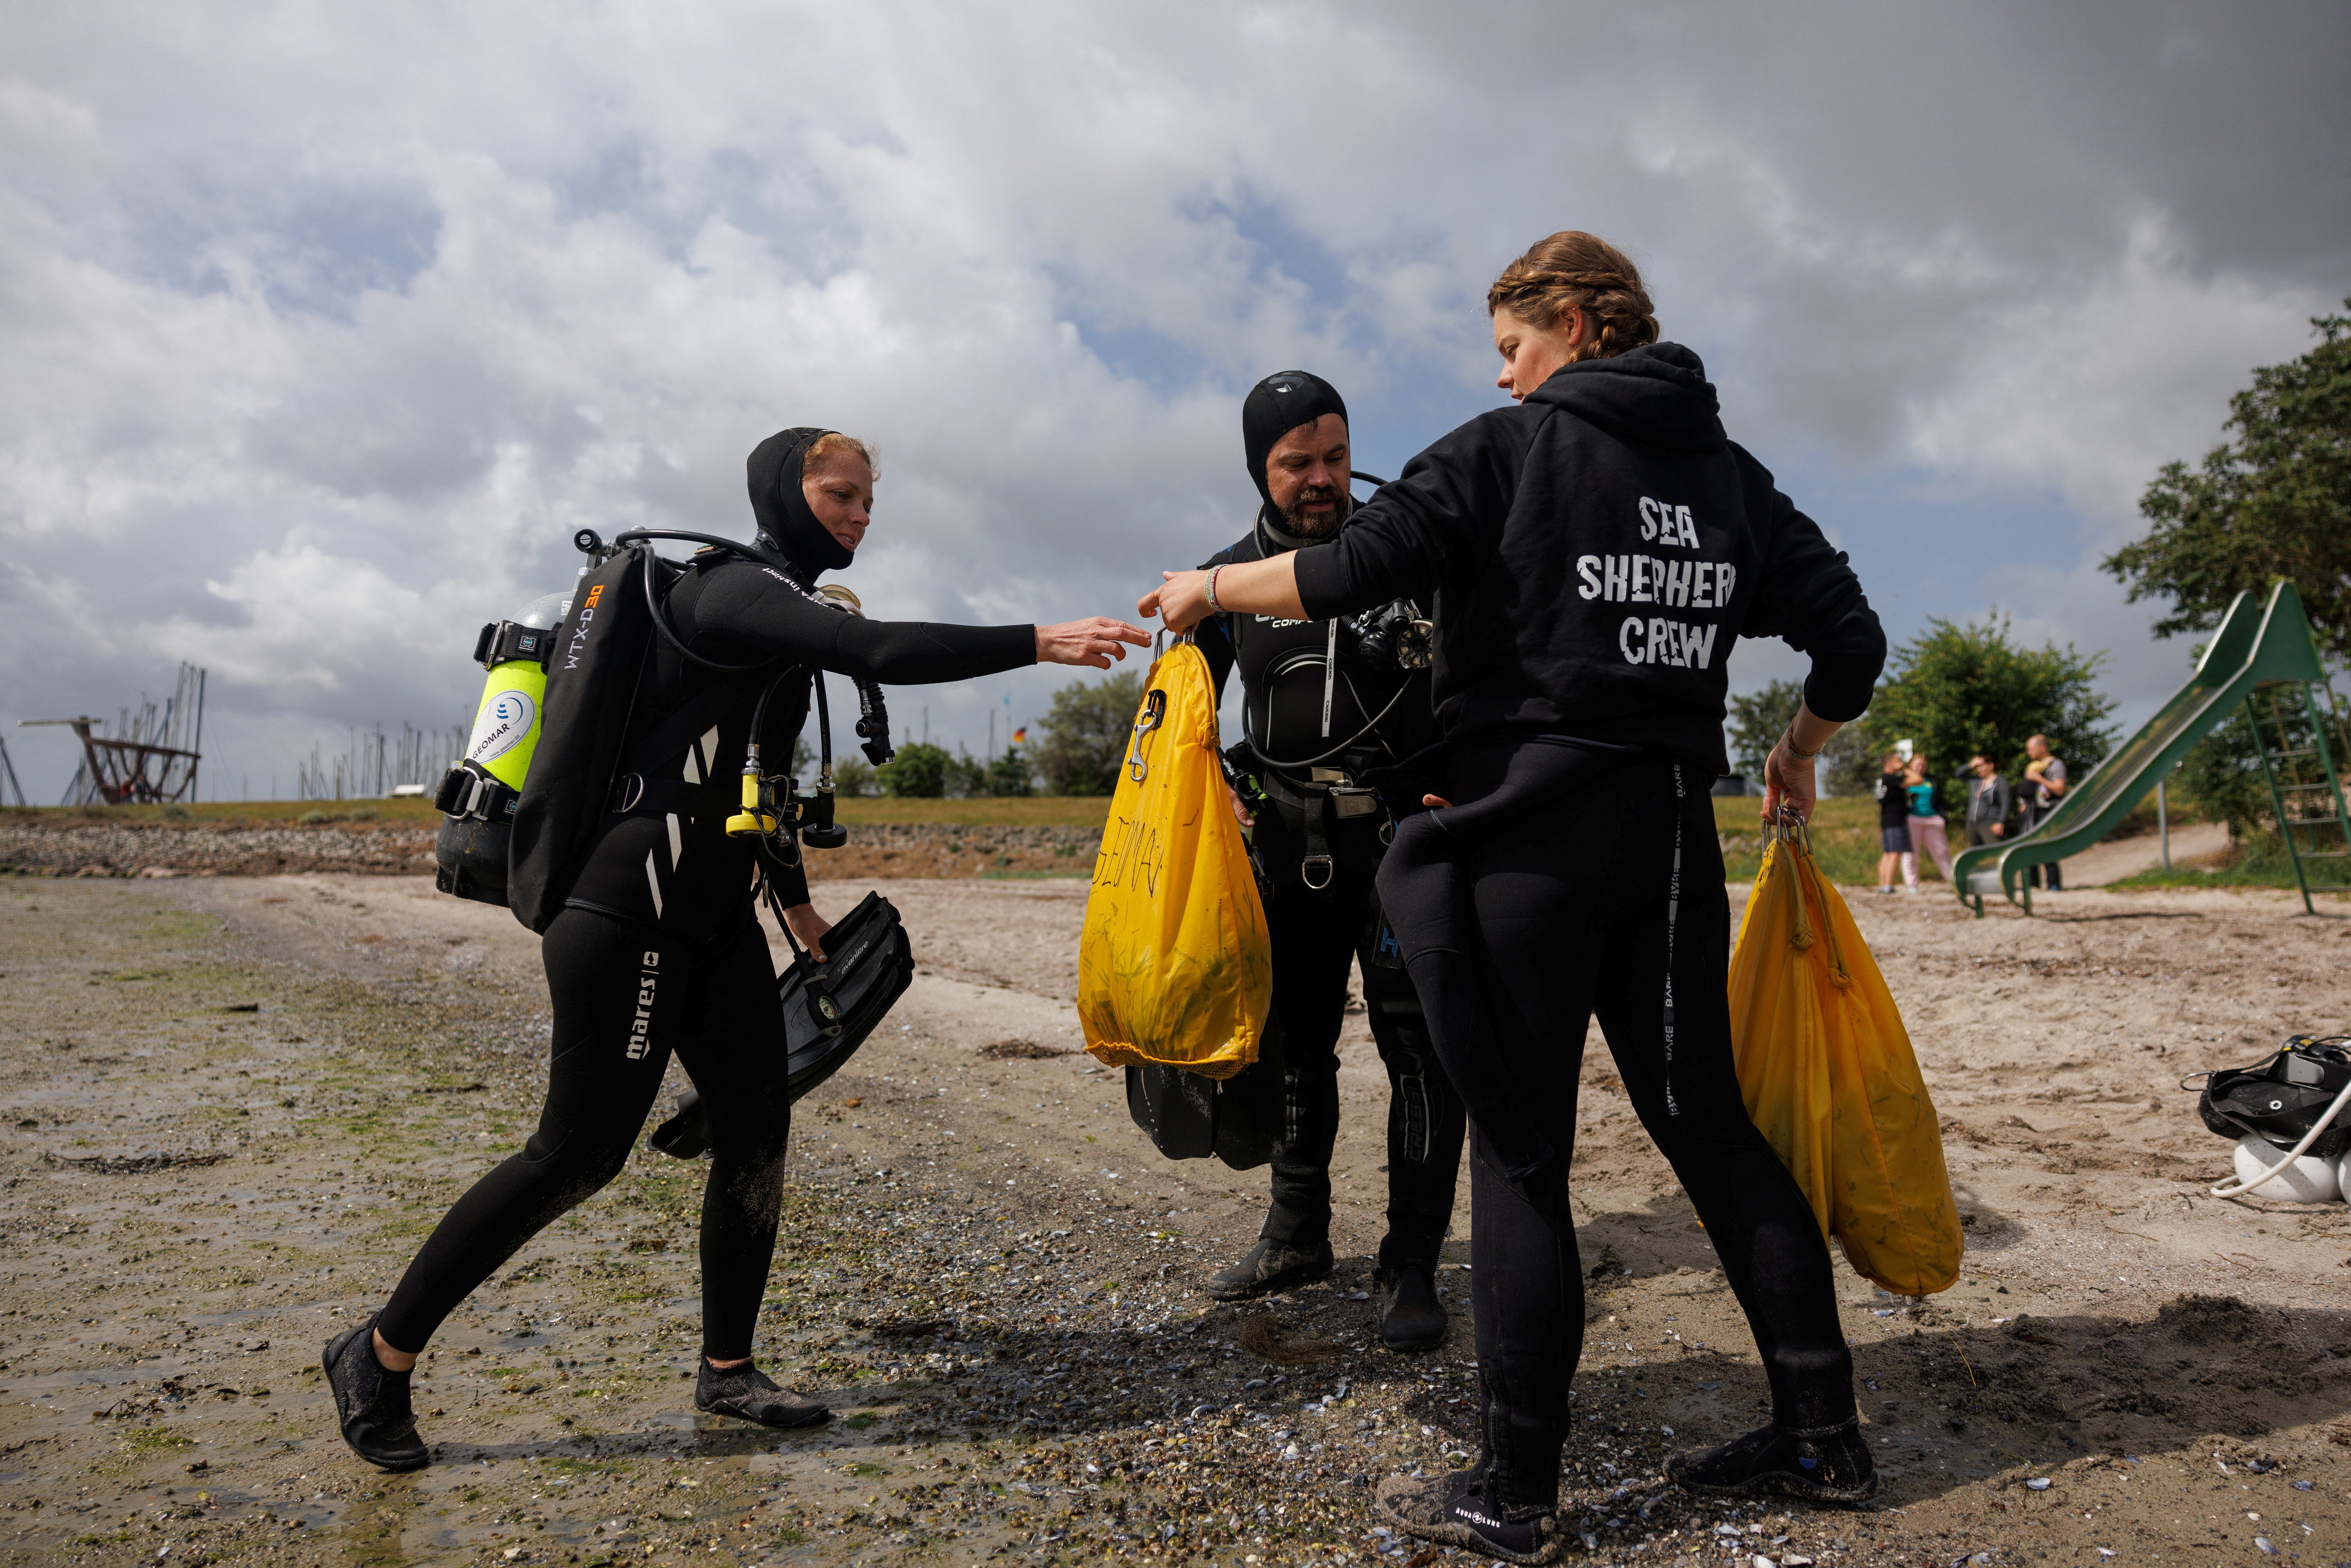 Lea Verfondern, 21, a veterinary assistant and member of the maritime conservation group Sea Shepherd, hands over bags with seagrass shoots to marine scientists Angela Stevenson, 39, and Tadhg O’Corcora, 38, during a two-day citizen diver course that aims to re-green the Baltic Sea in Maasholm, Northern Germany, 2 July